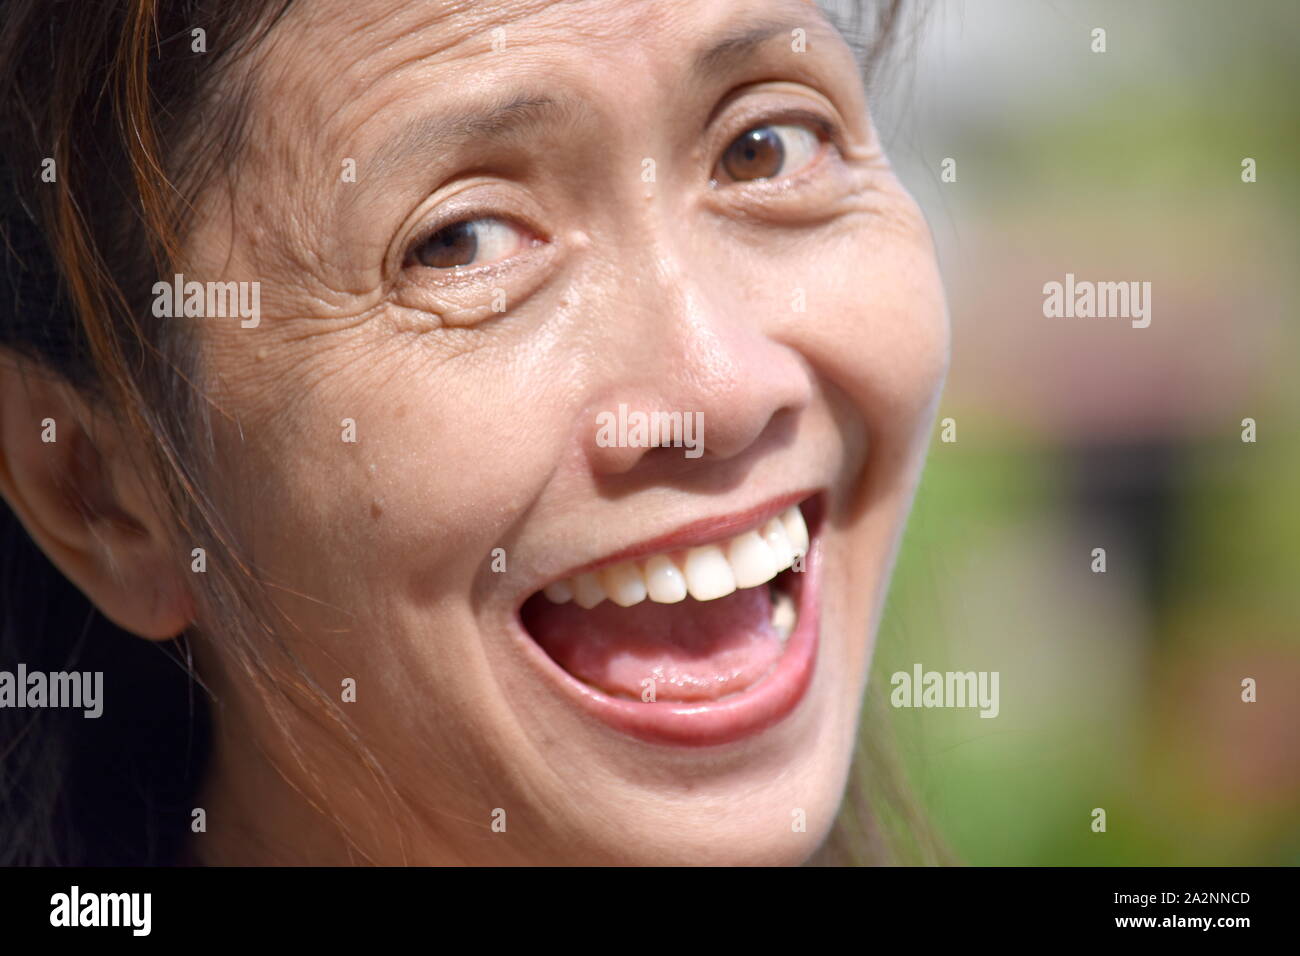 A Diverse Female Senior And Laughter Stock Photo